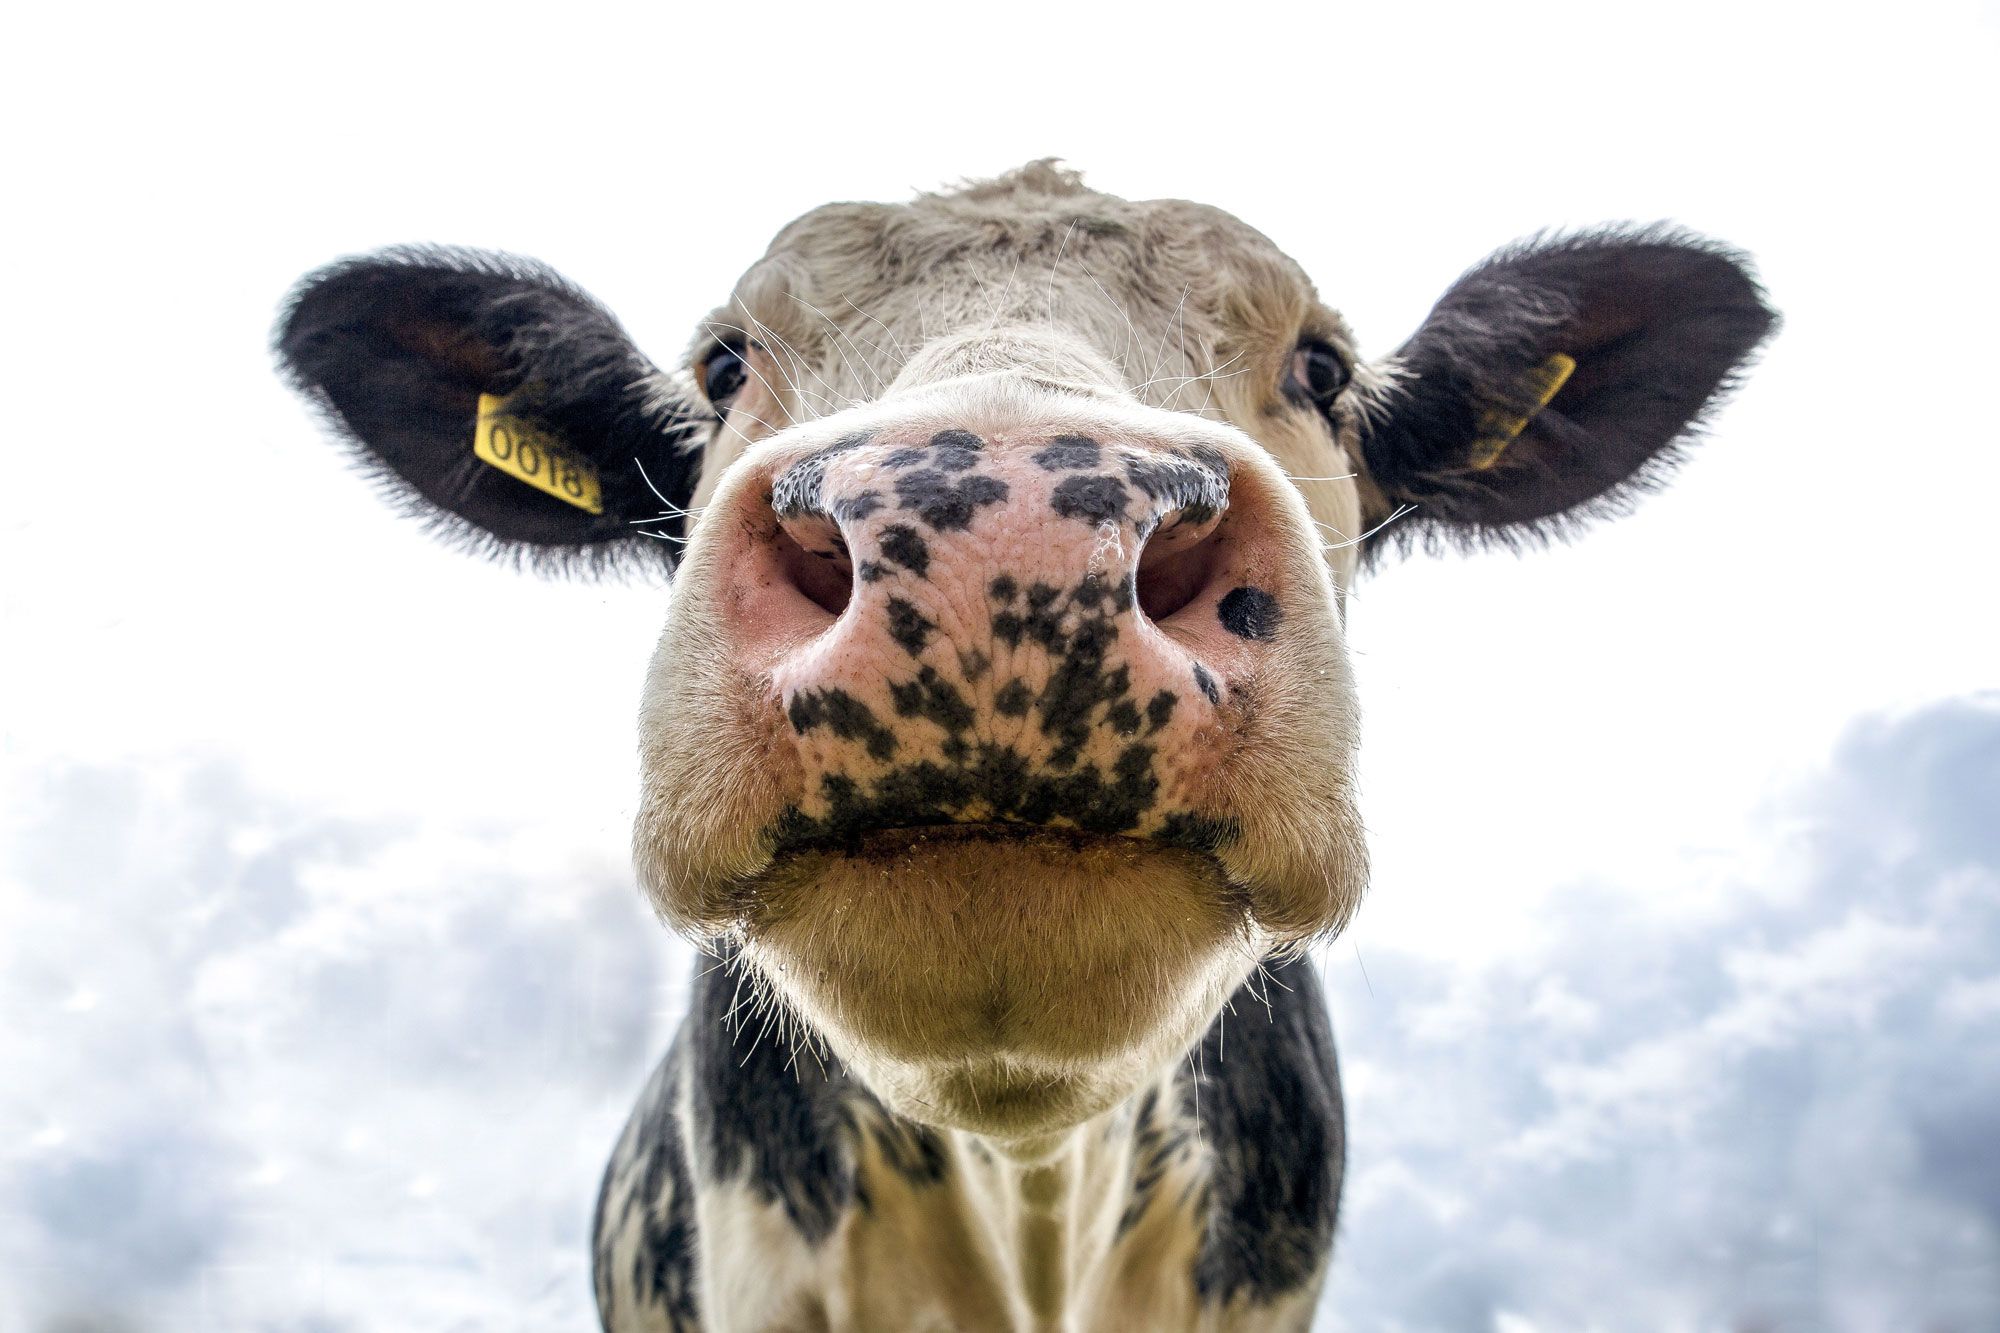 https://api.tierarztpraxis-baer.ch/storage/285/black-and-white-dairy-cow-s-head-2647053.jpg